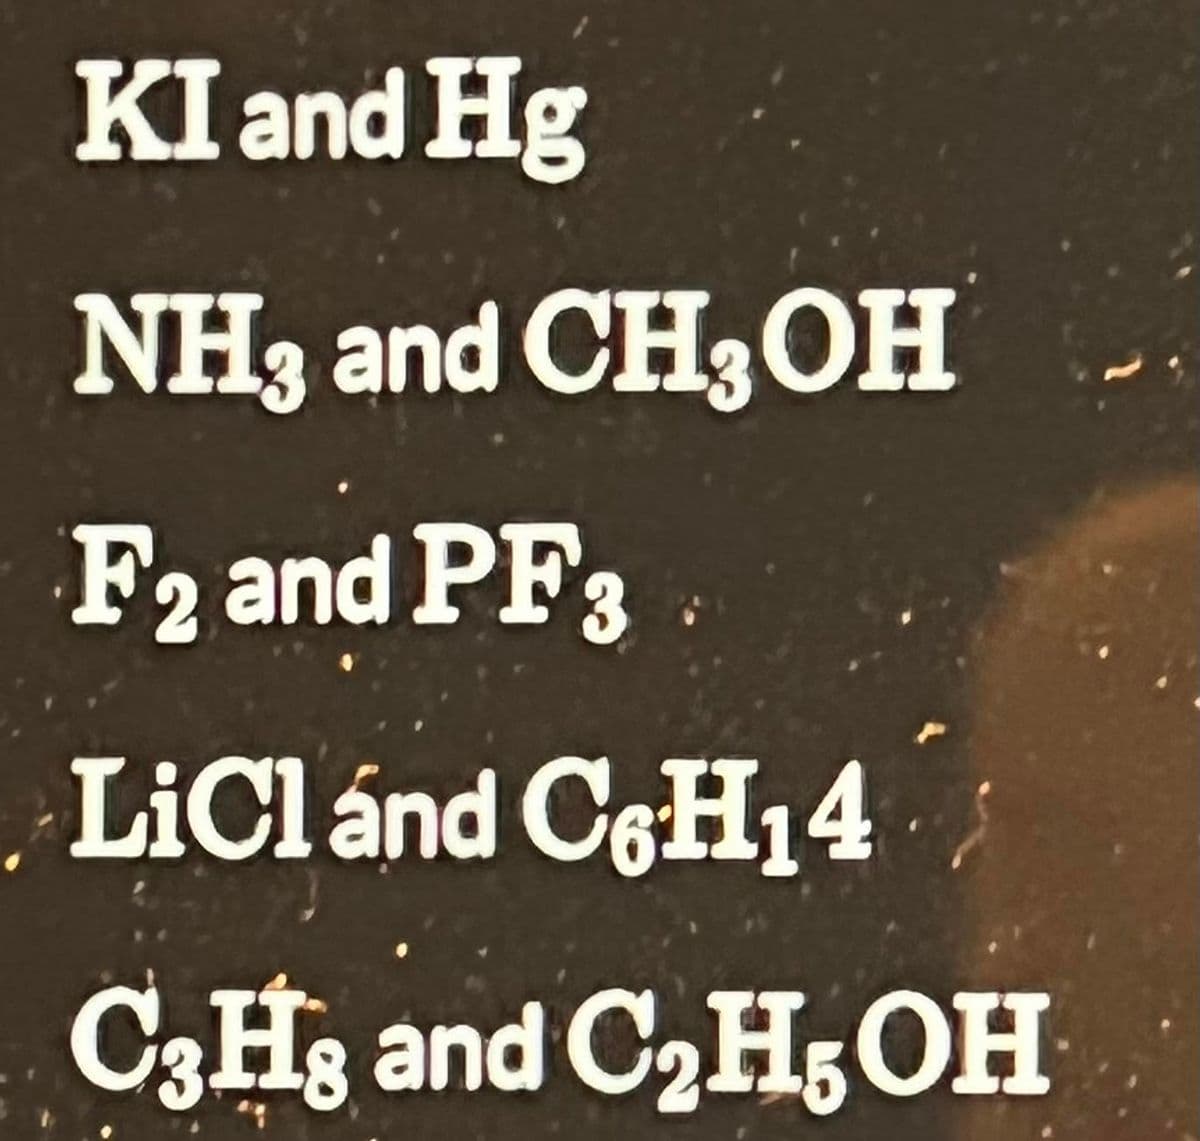 KI and Hg
NH3 and CH3OH
F2 and PF3
LiCl and C6H₁4
C3H8 and C₂H5OH